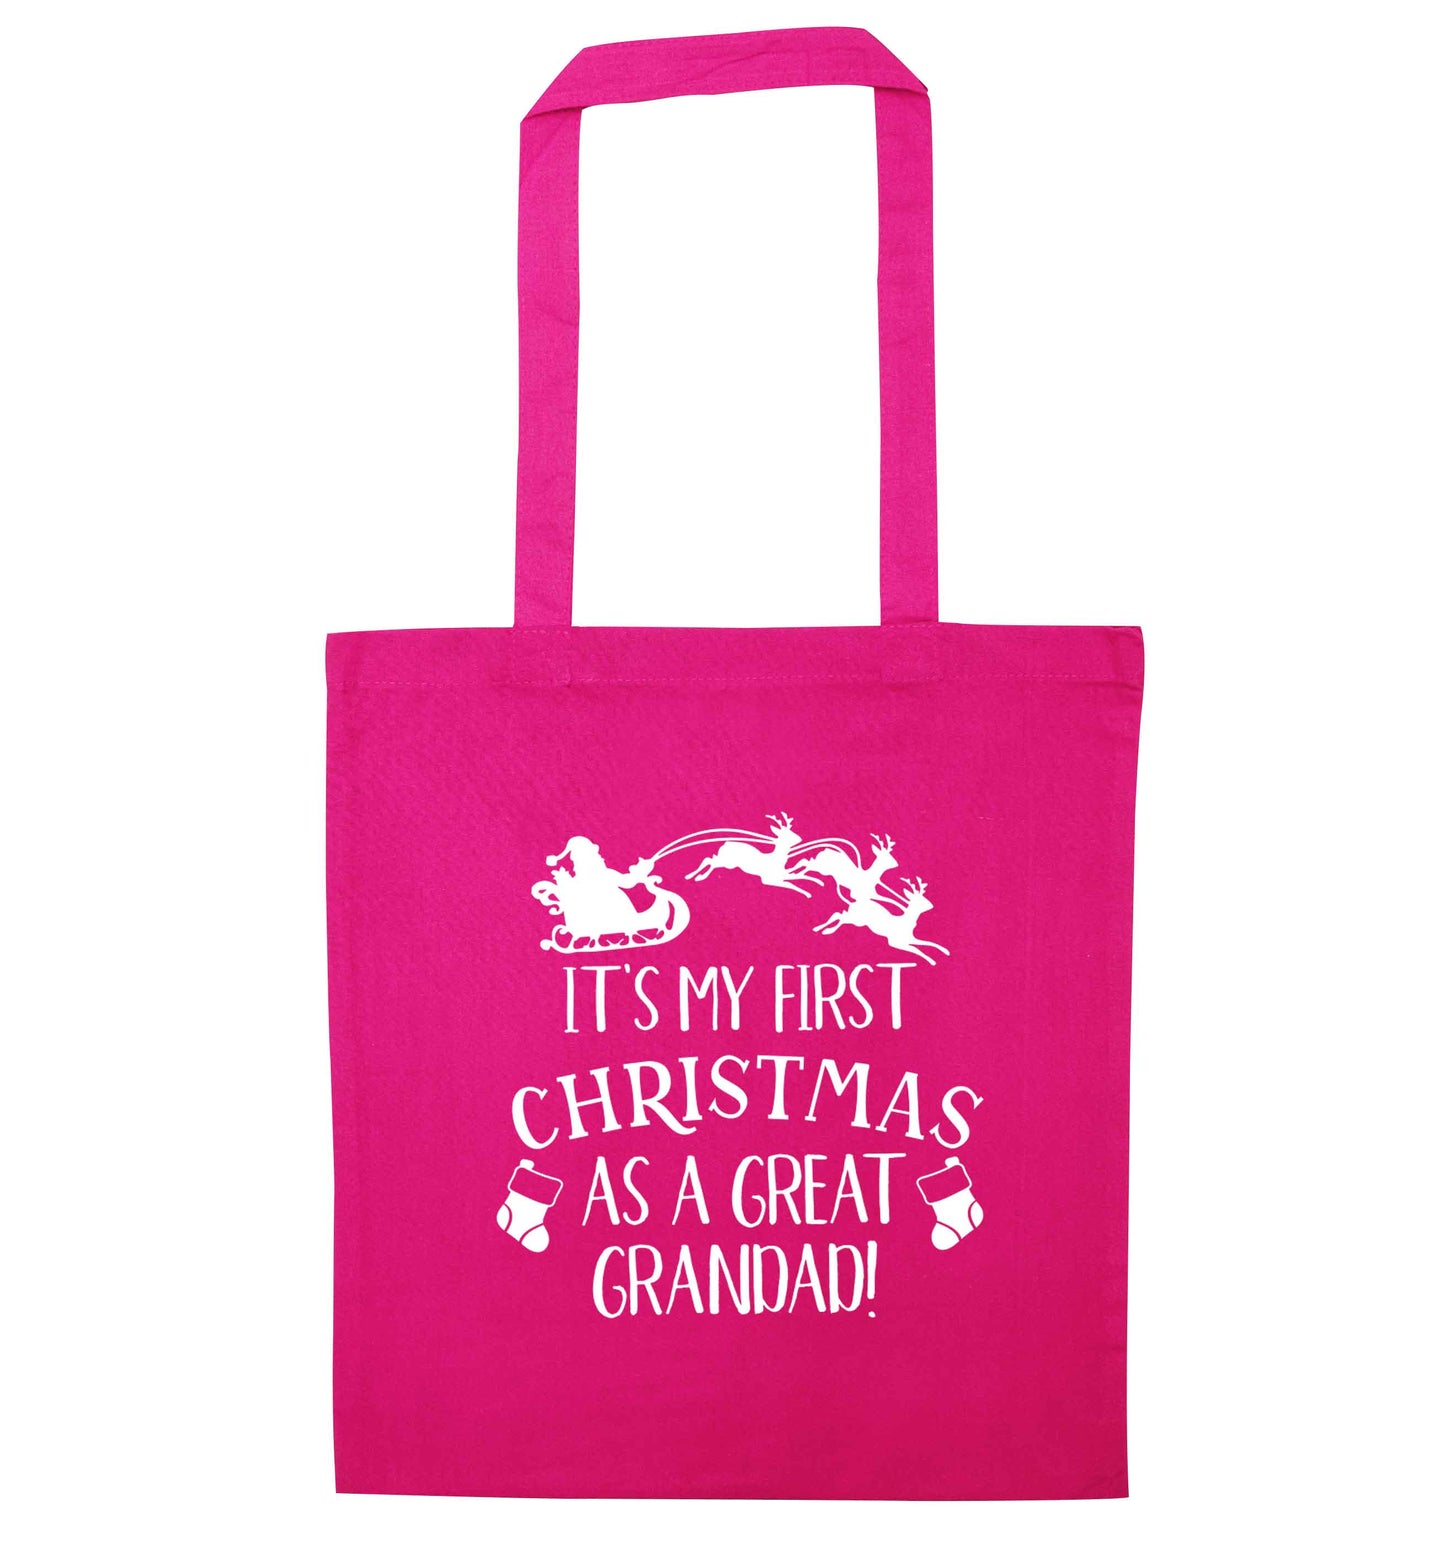 It's my first Christmas as a great grandad! pink tote bag